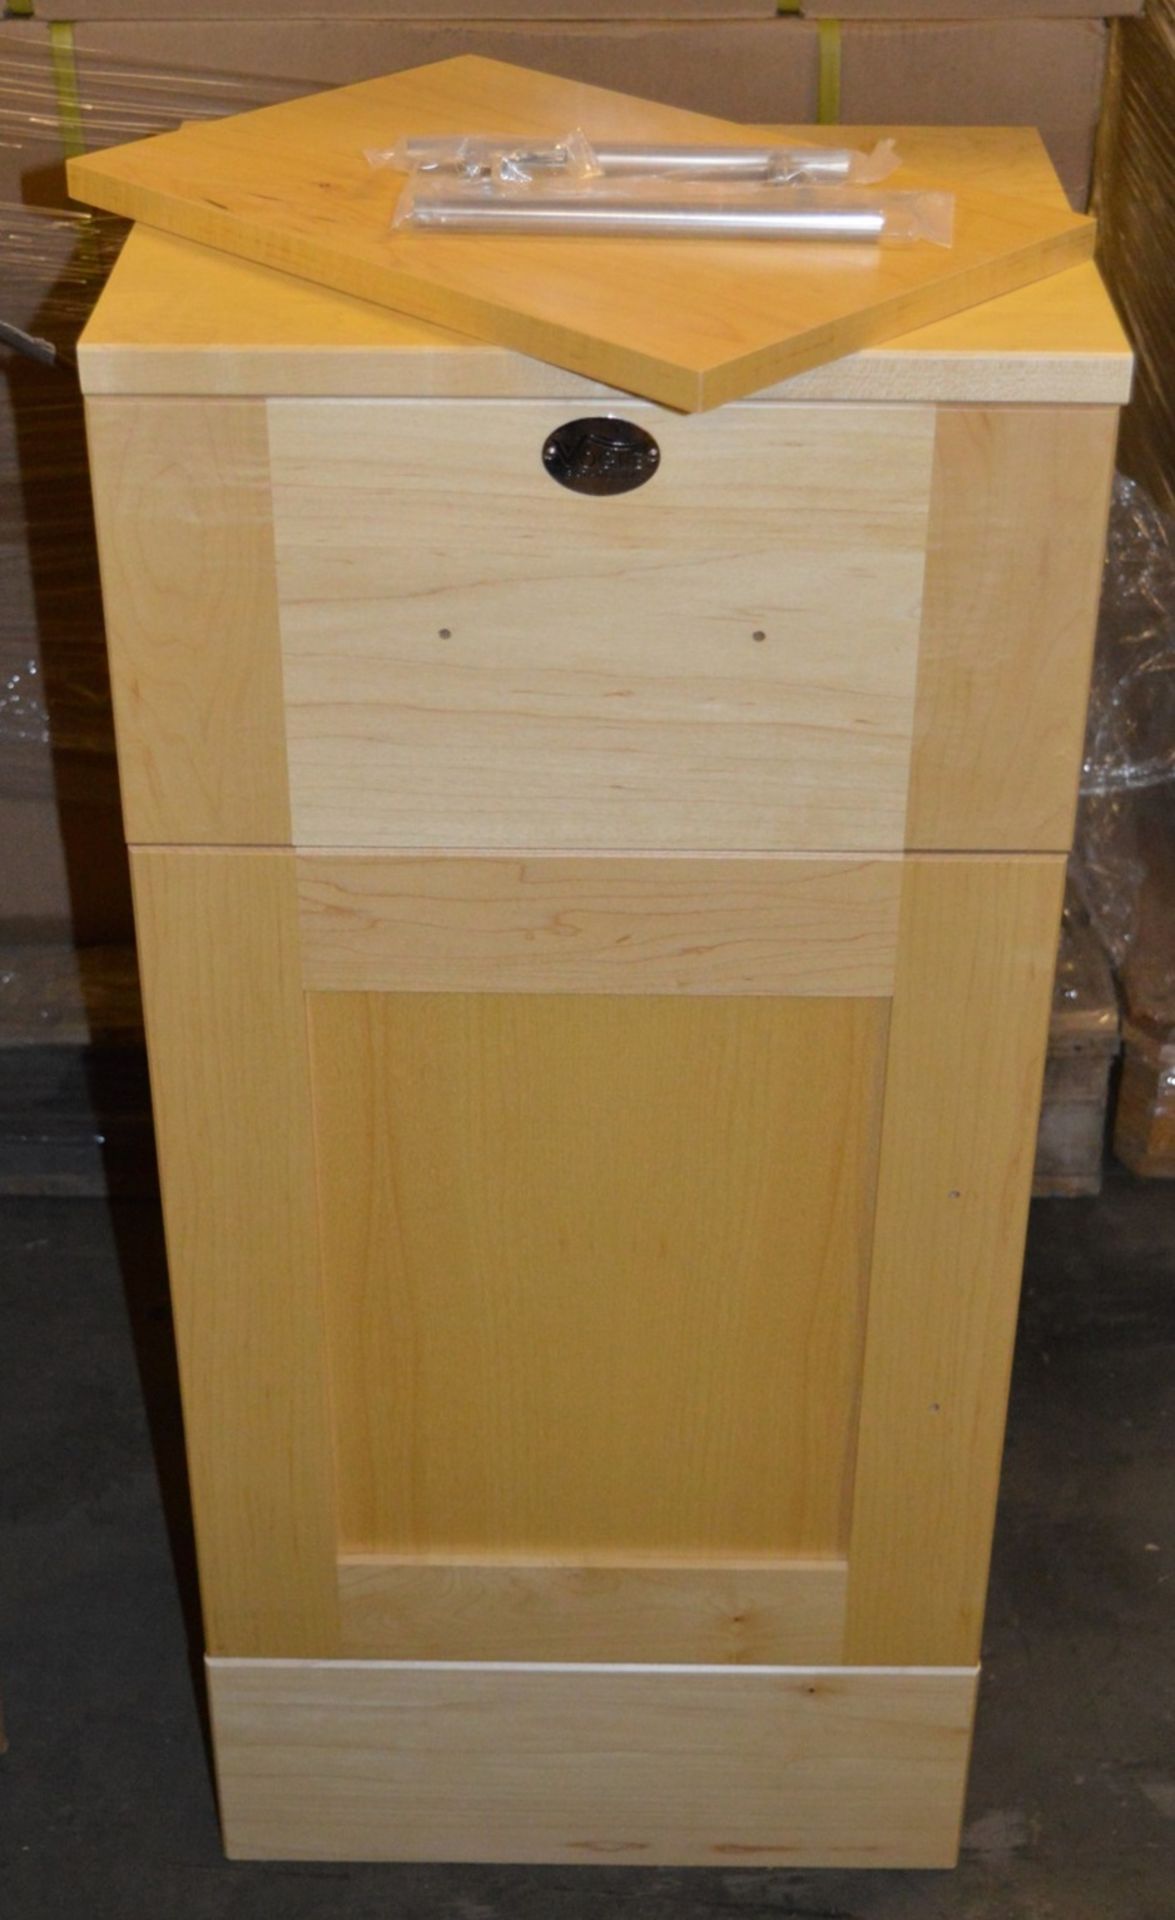 1 x Vogue Bathrooms KUDOS Bathroom Storage Cabinet - 400mm Width - Maple Shaker Style - CL034 - - Image 6 of 6